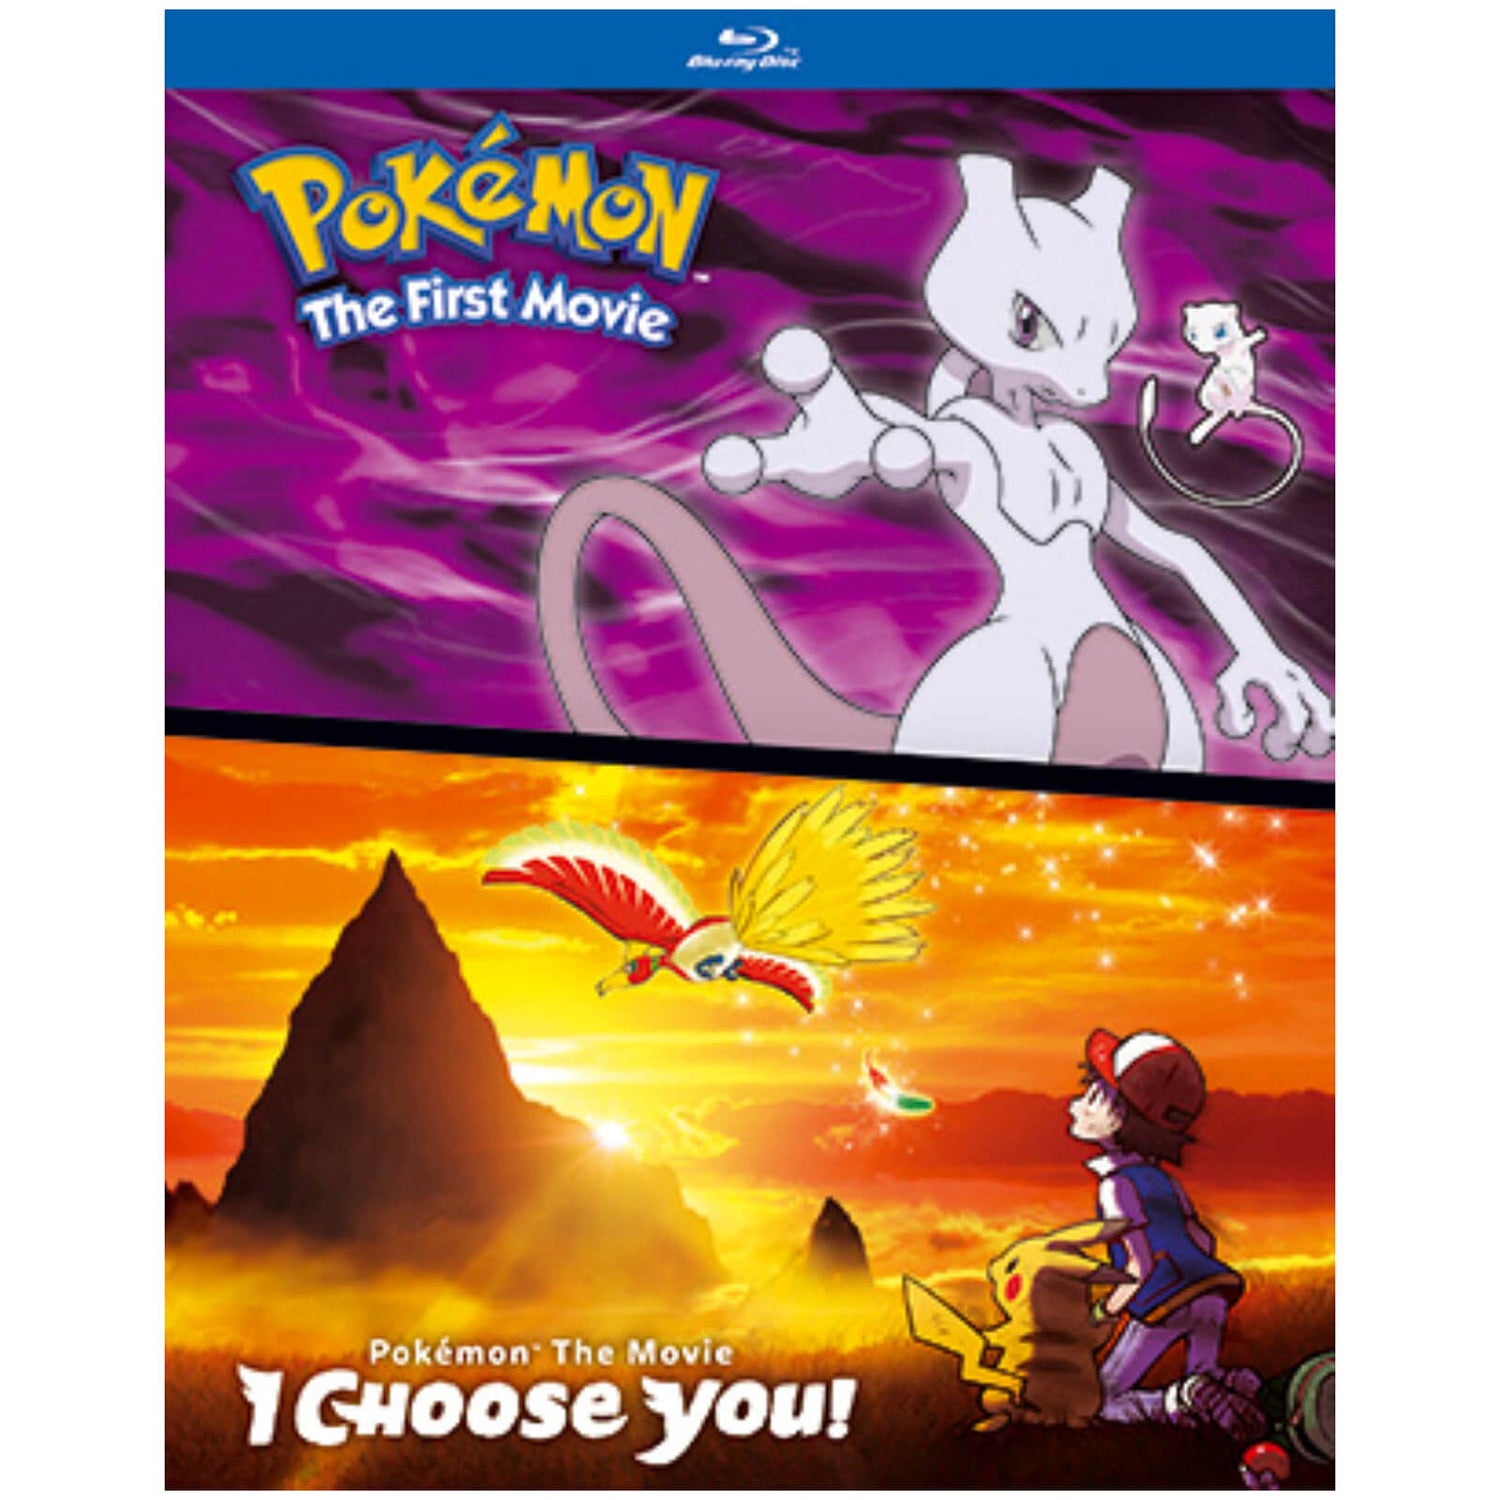 Pok?mon: The First Movie / Pok?mon The Movie: I Choose You! (US Import)